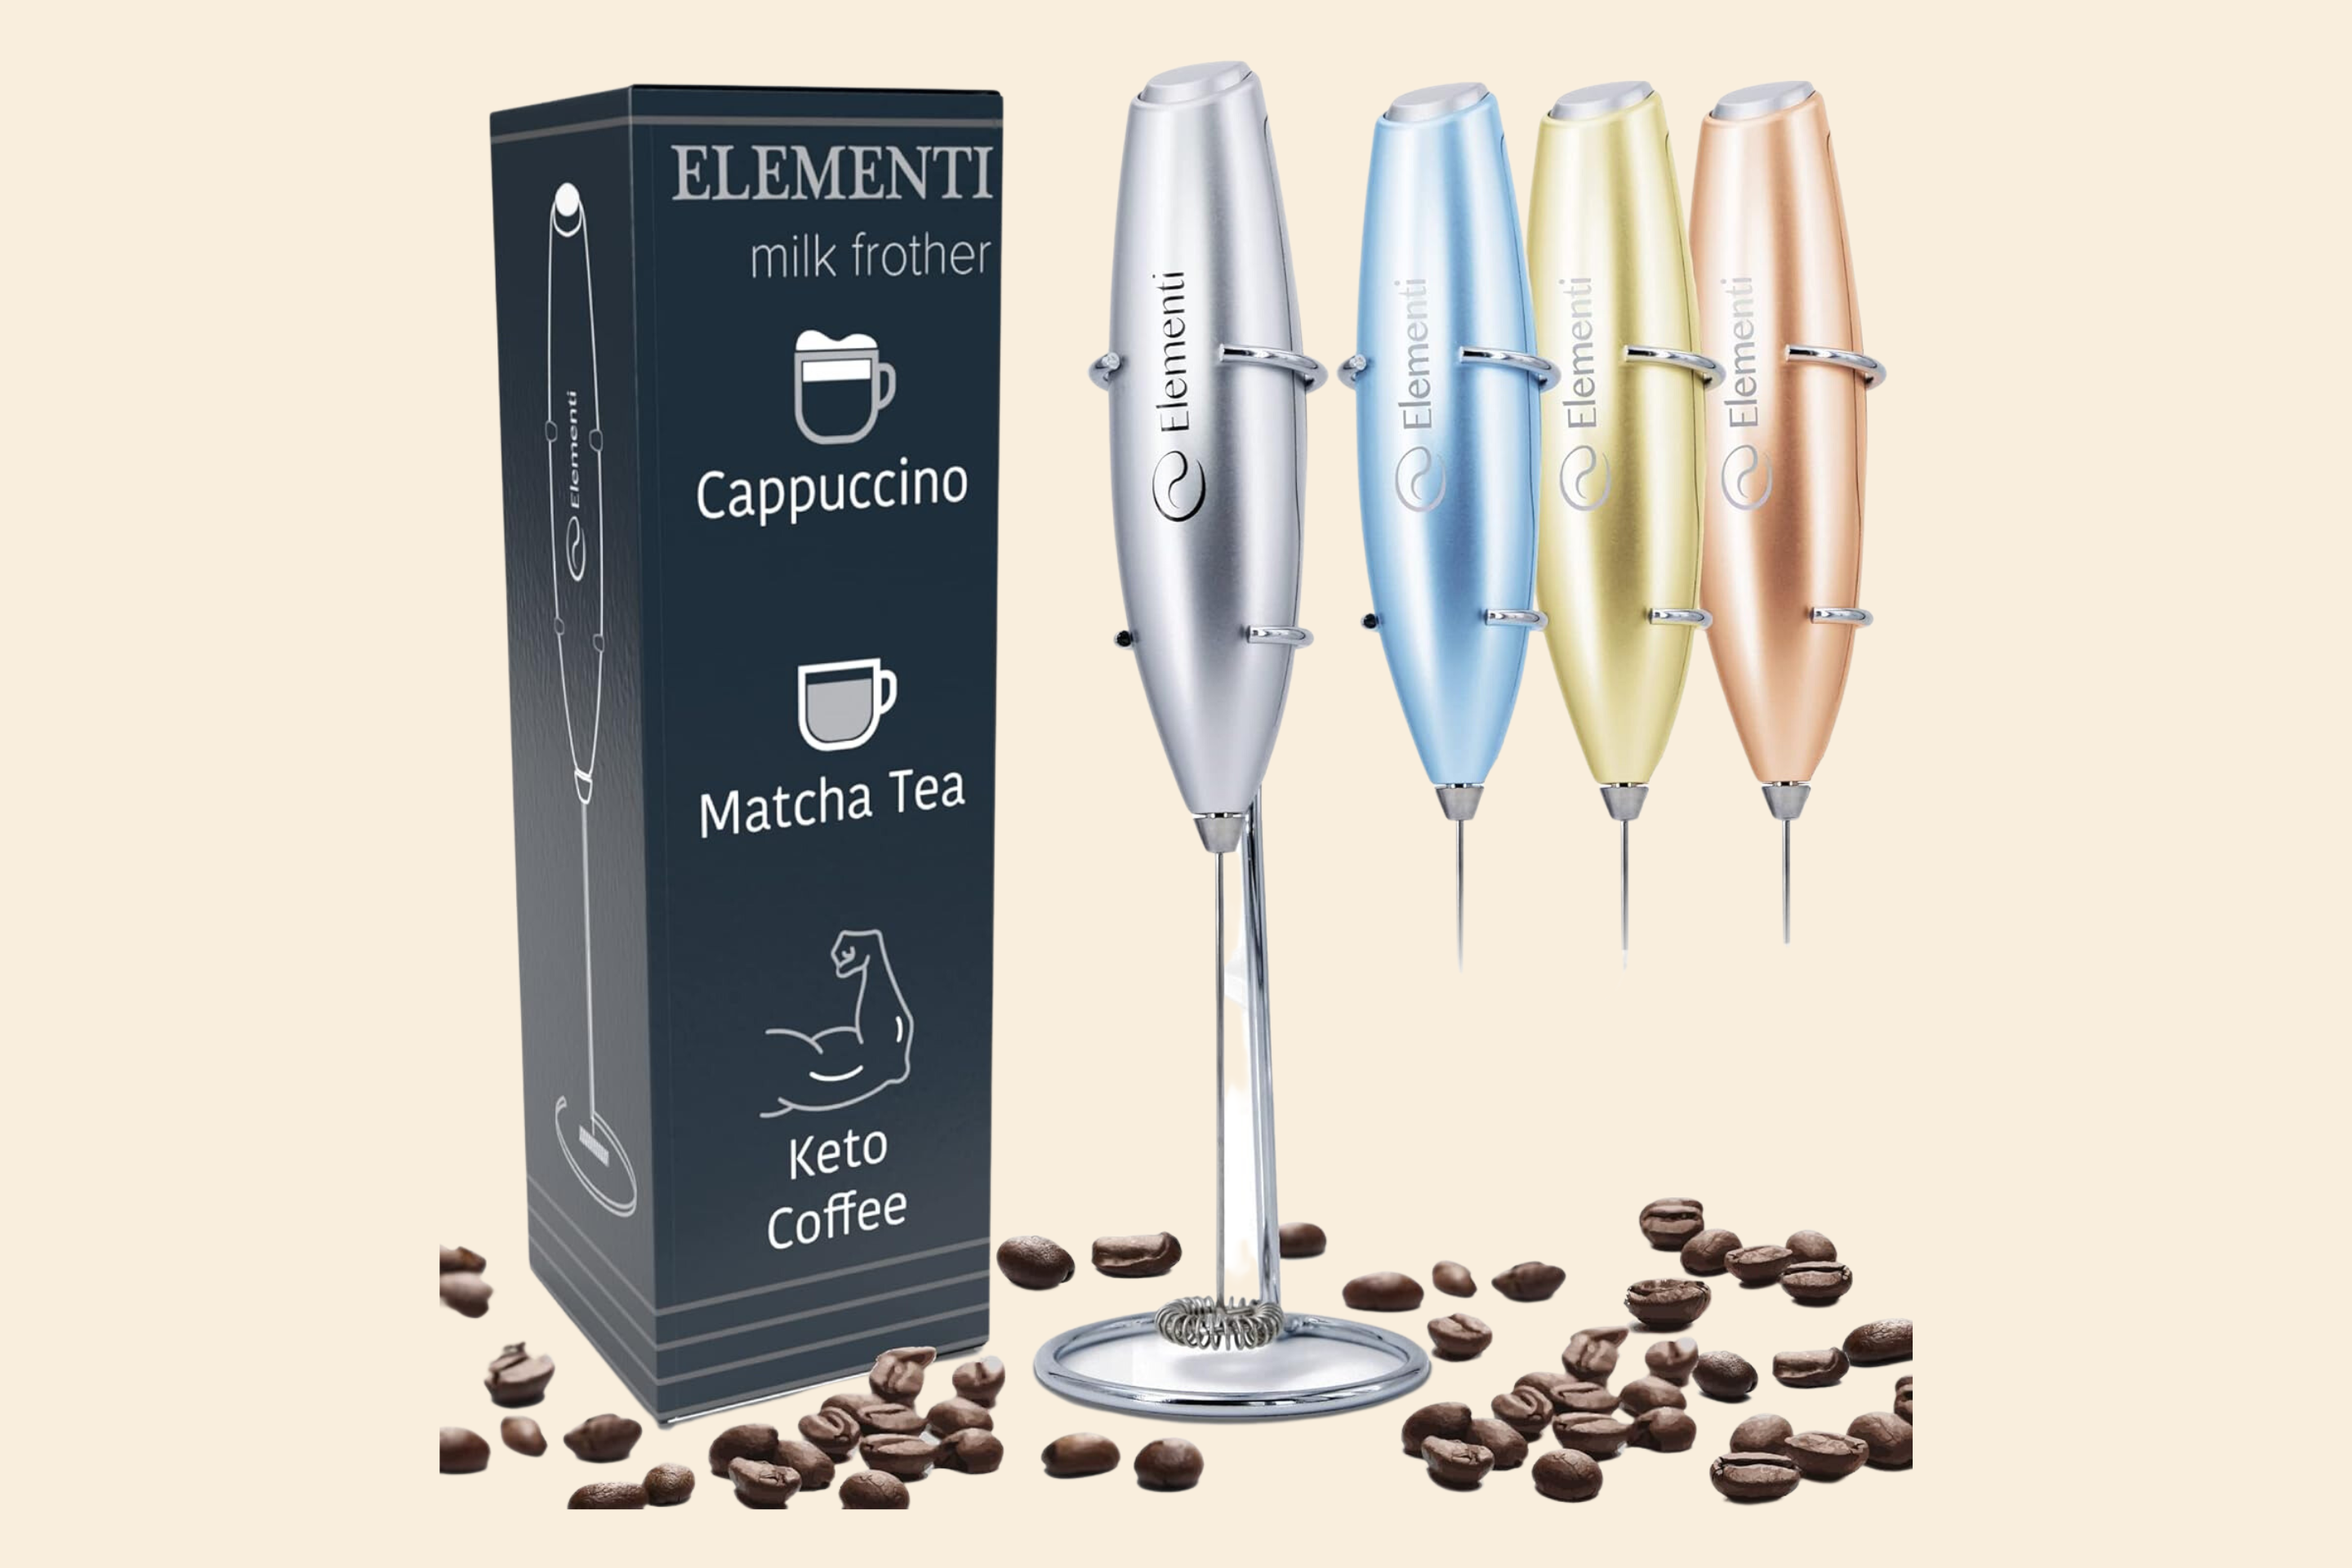 Elementi Milk Frother Construction